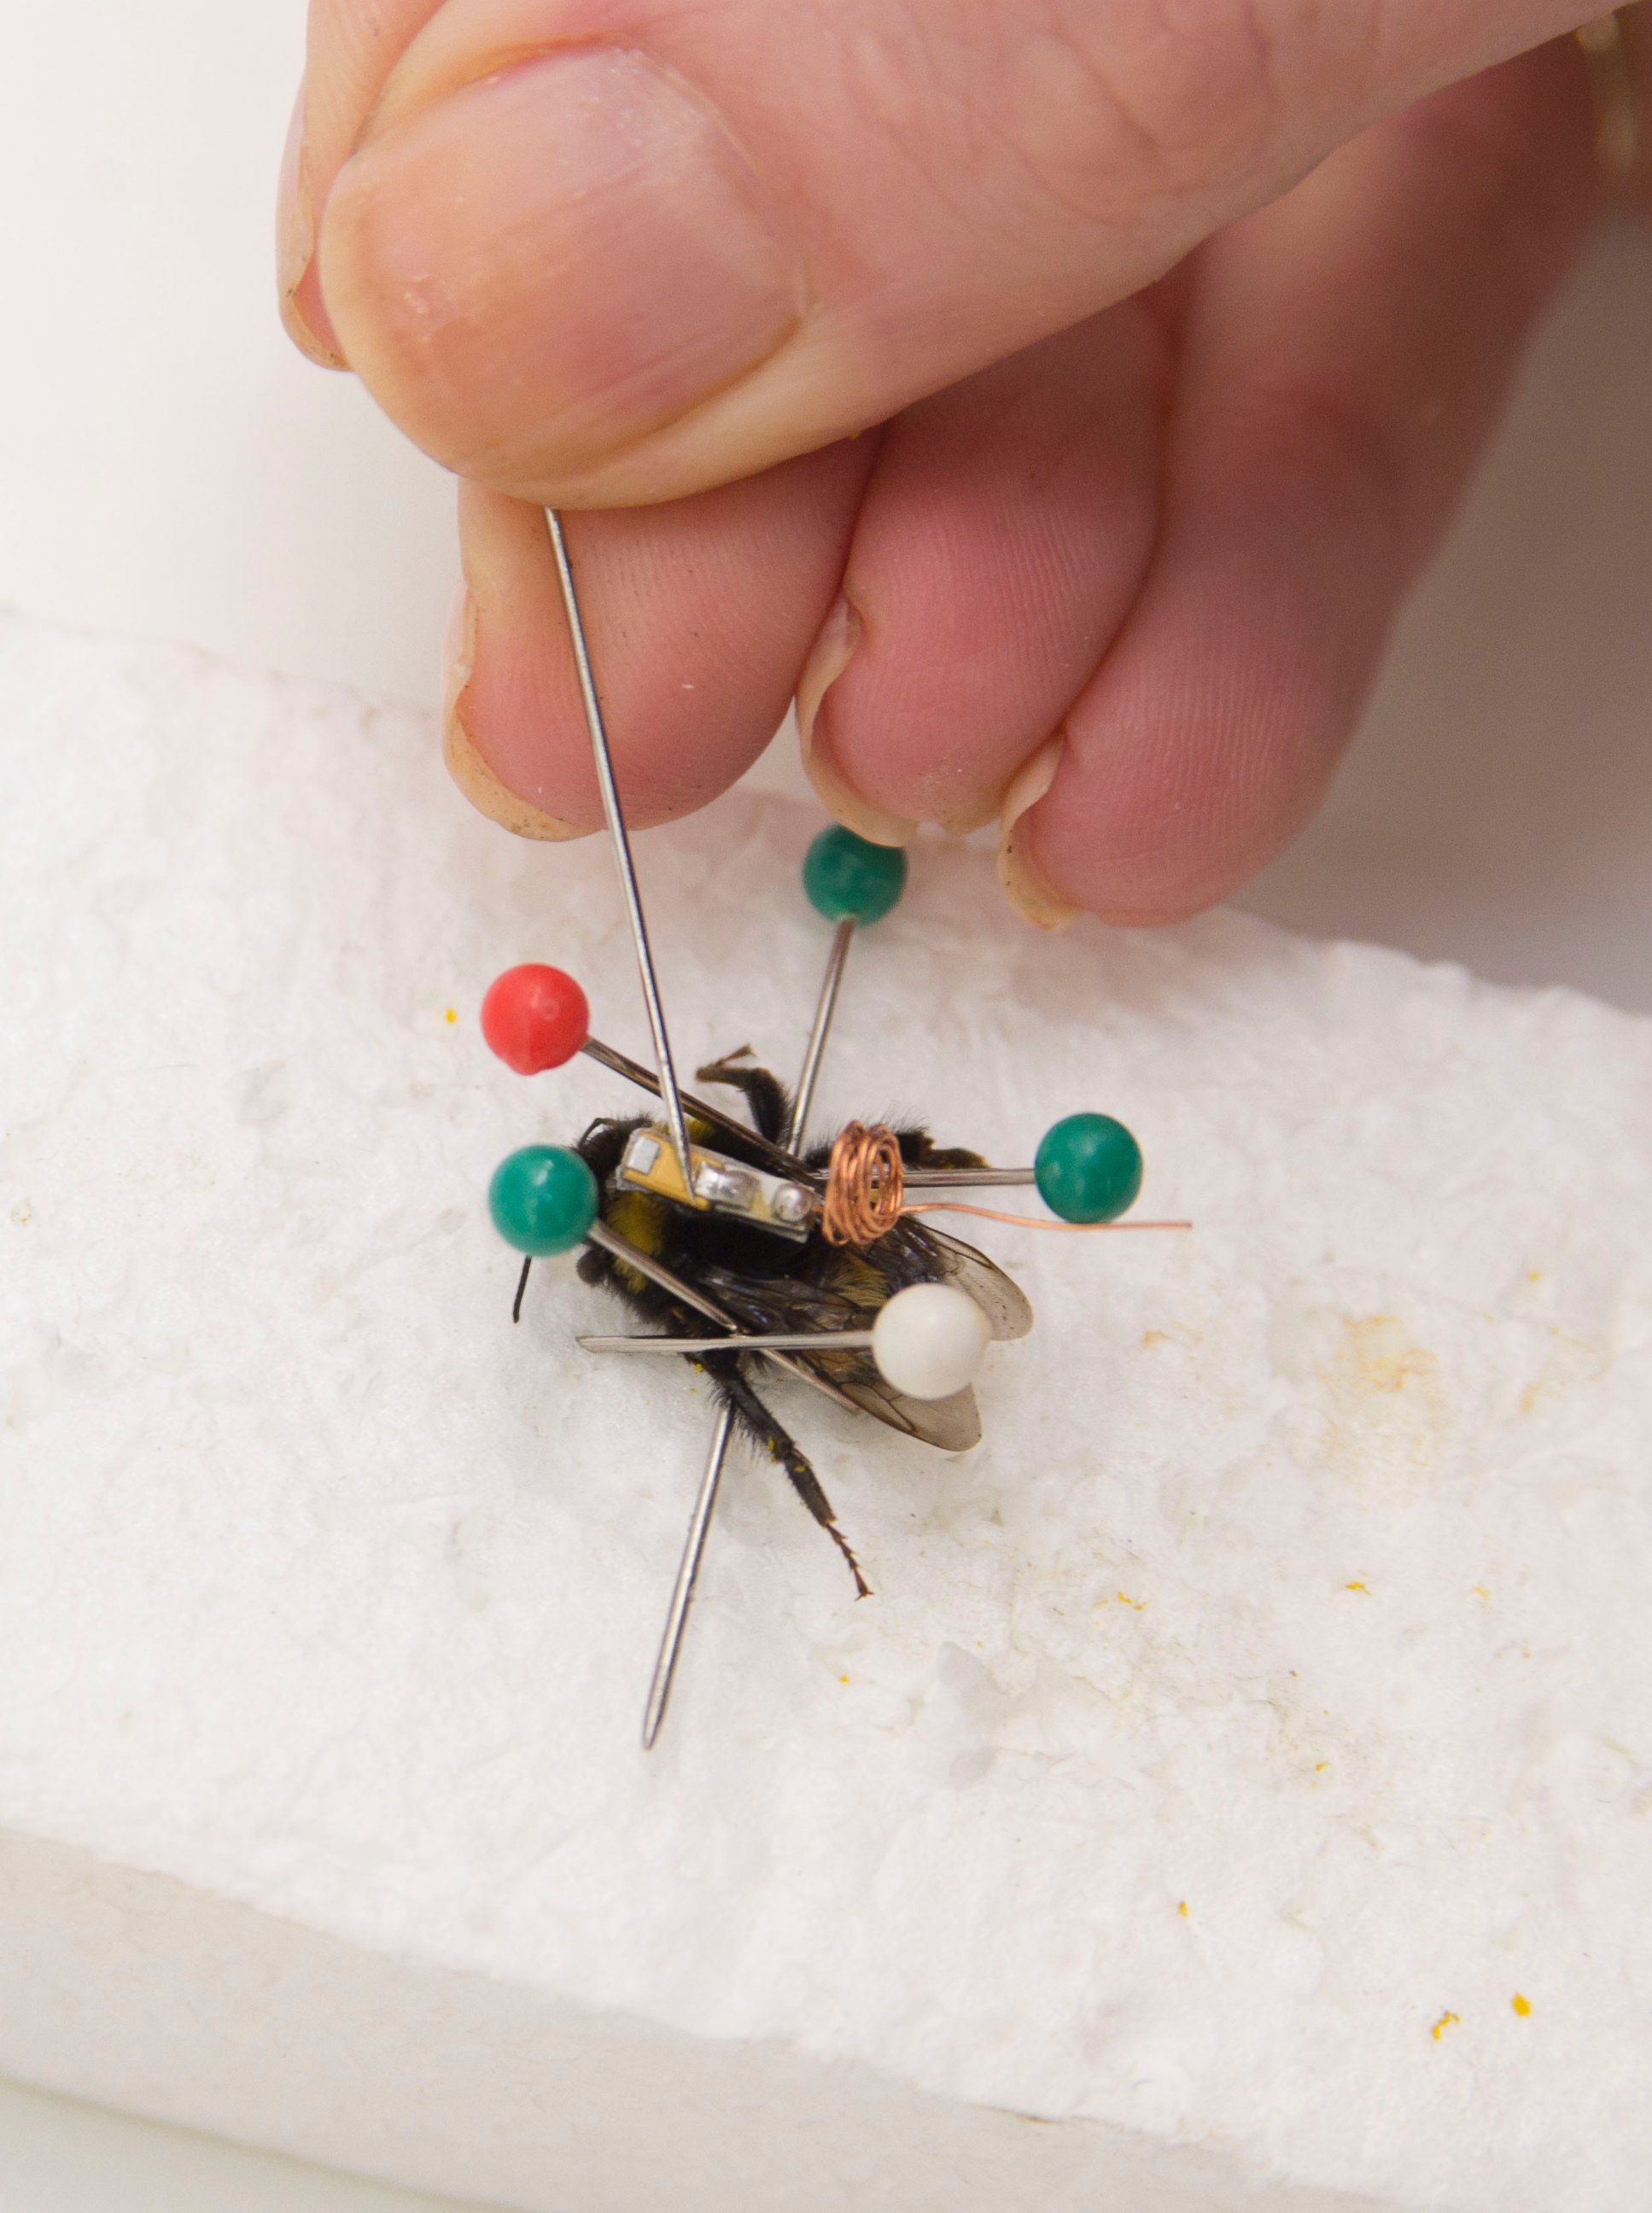 PHOTO: Kew Gardens in London is mapping bee behavior using tiny trackers mounted to their bodies.
